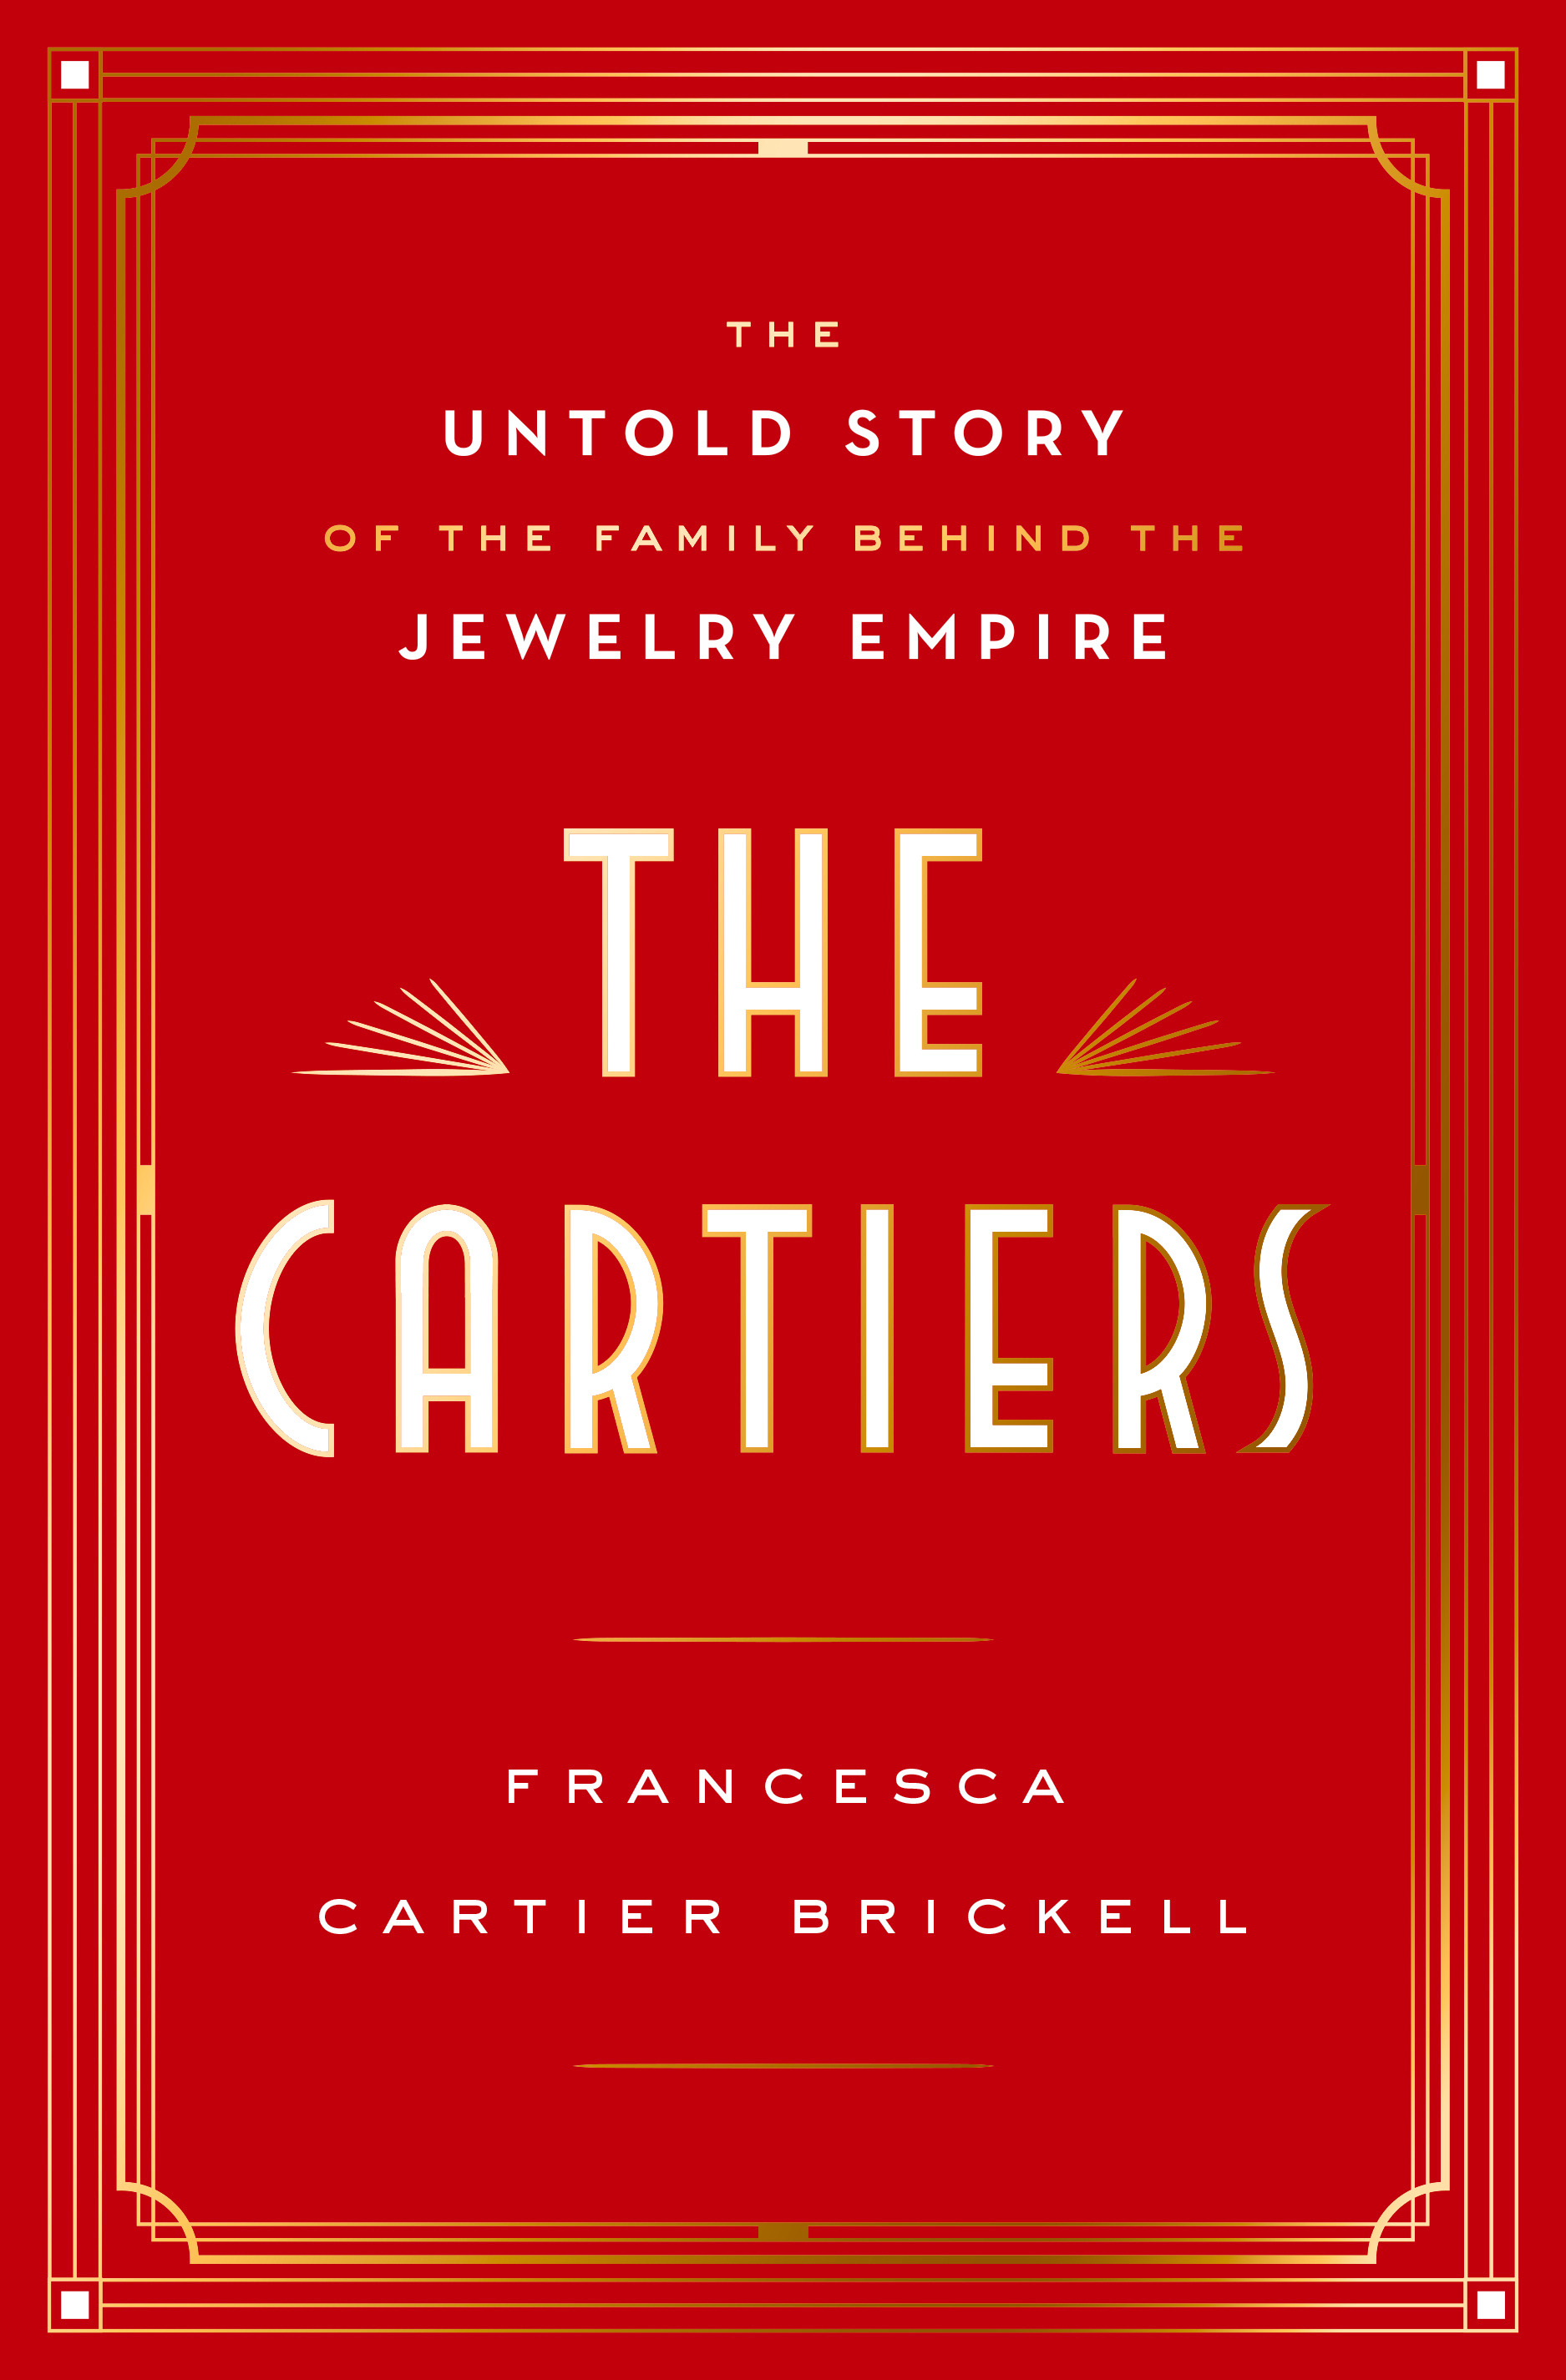 THE CARTIERS: The Untold Story of the Family Behind the Jewelry Empire By Francesca Cartier Brickell